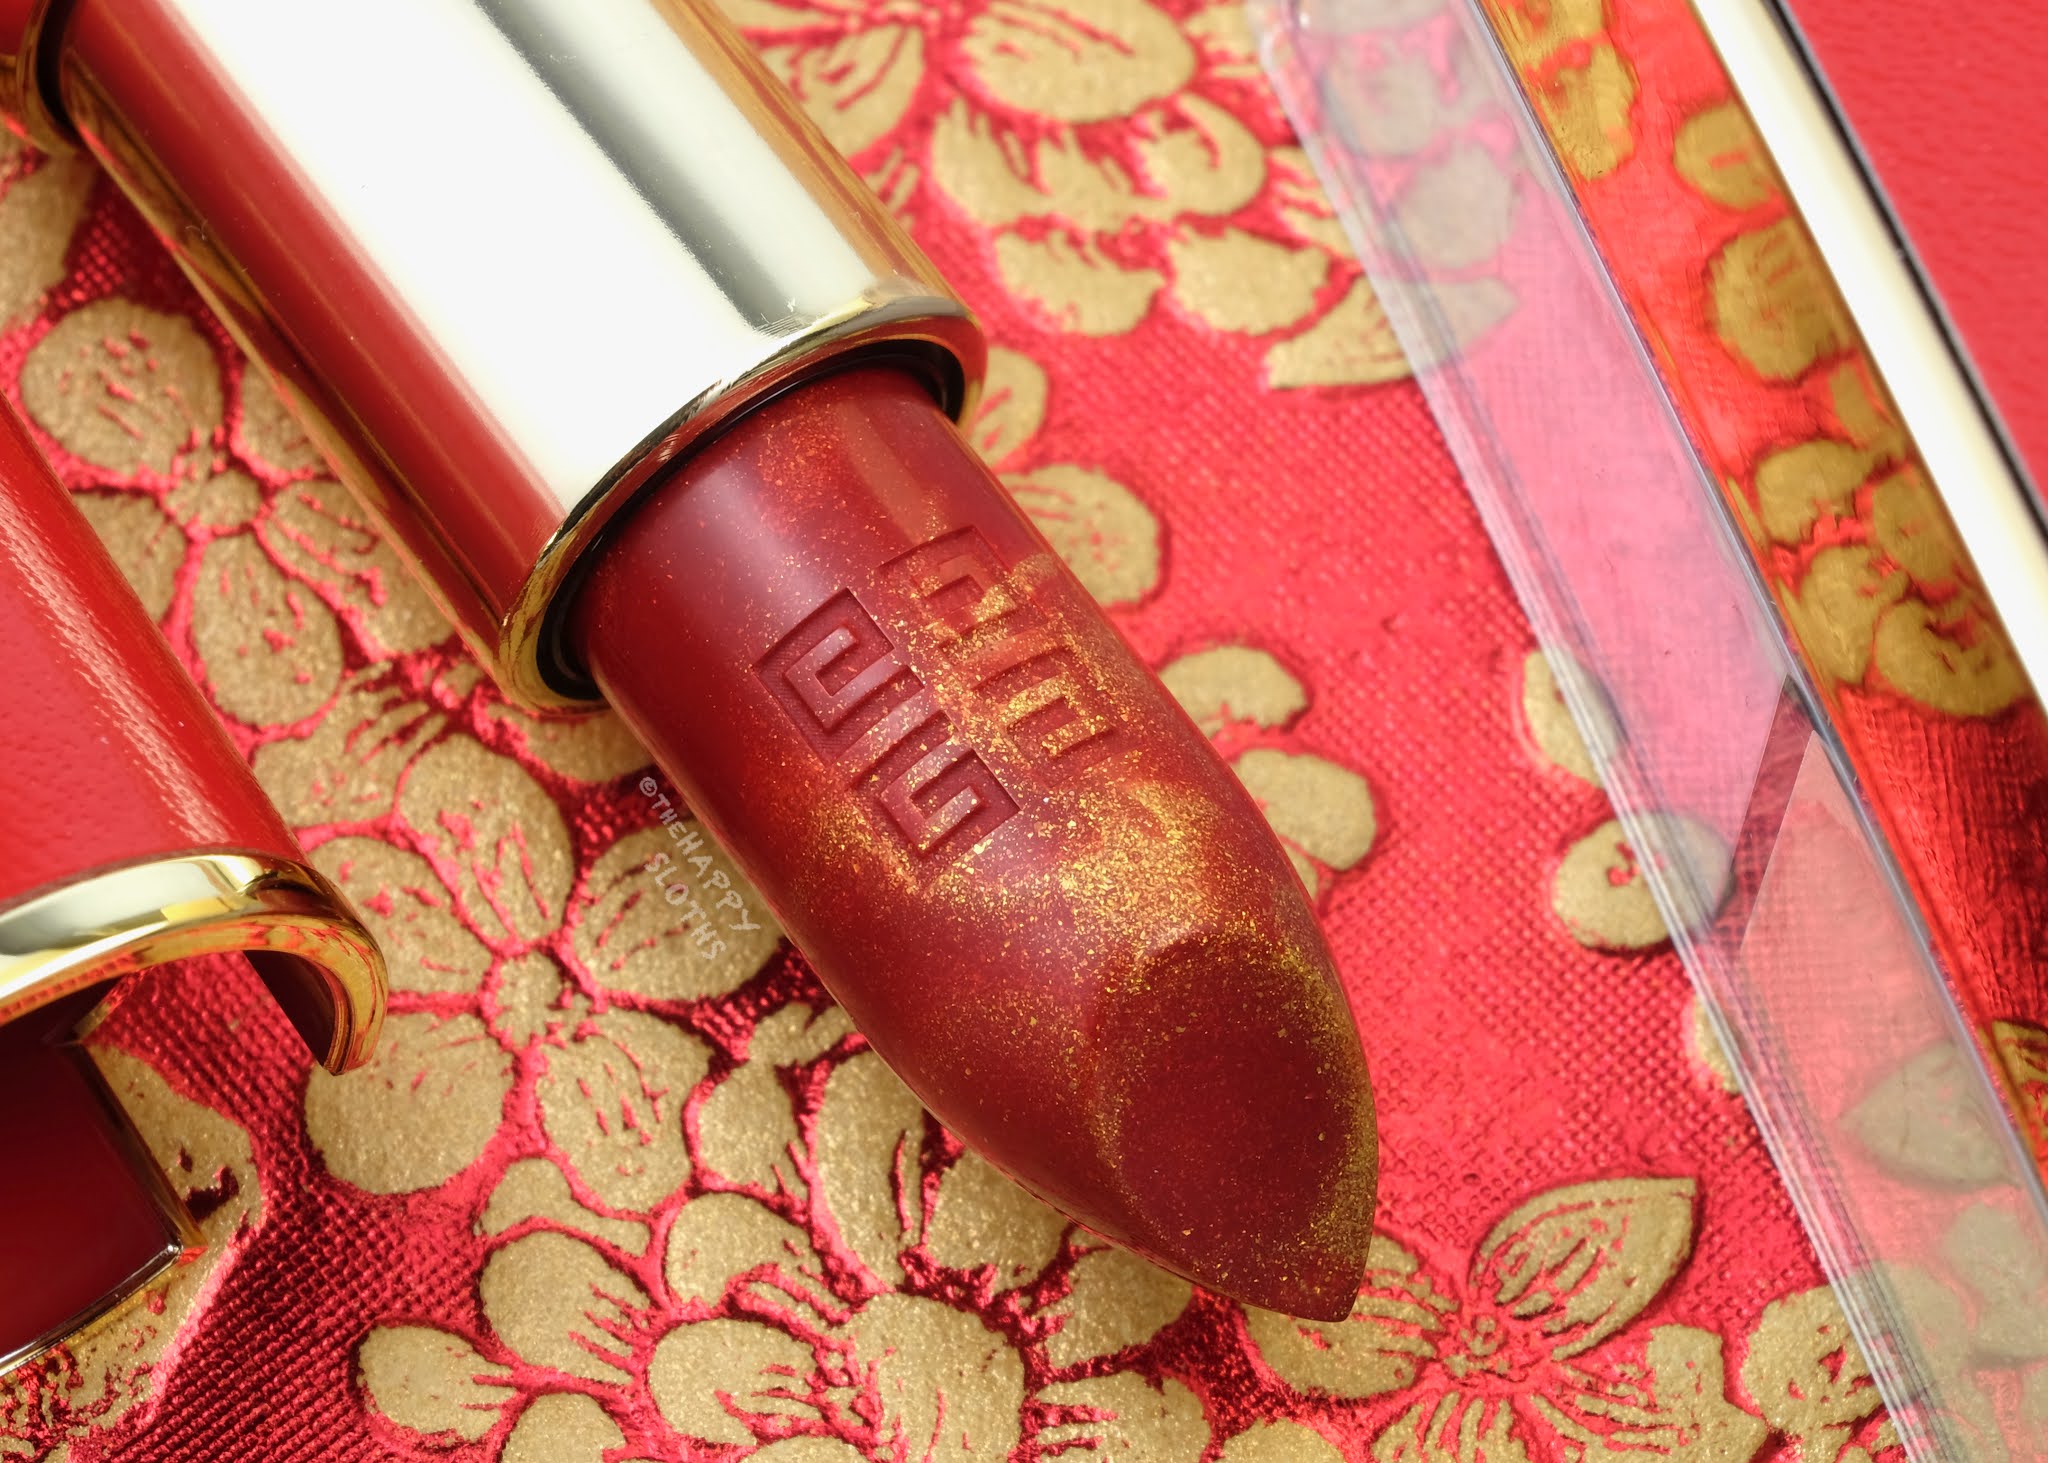 Givenchy | Le Rouge Lunar New Year Edition 2021 in "888 Golden Red": Review and Swatches